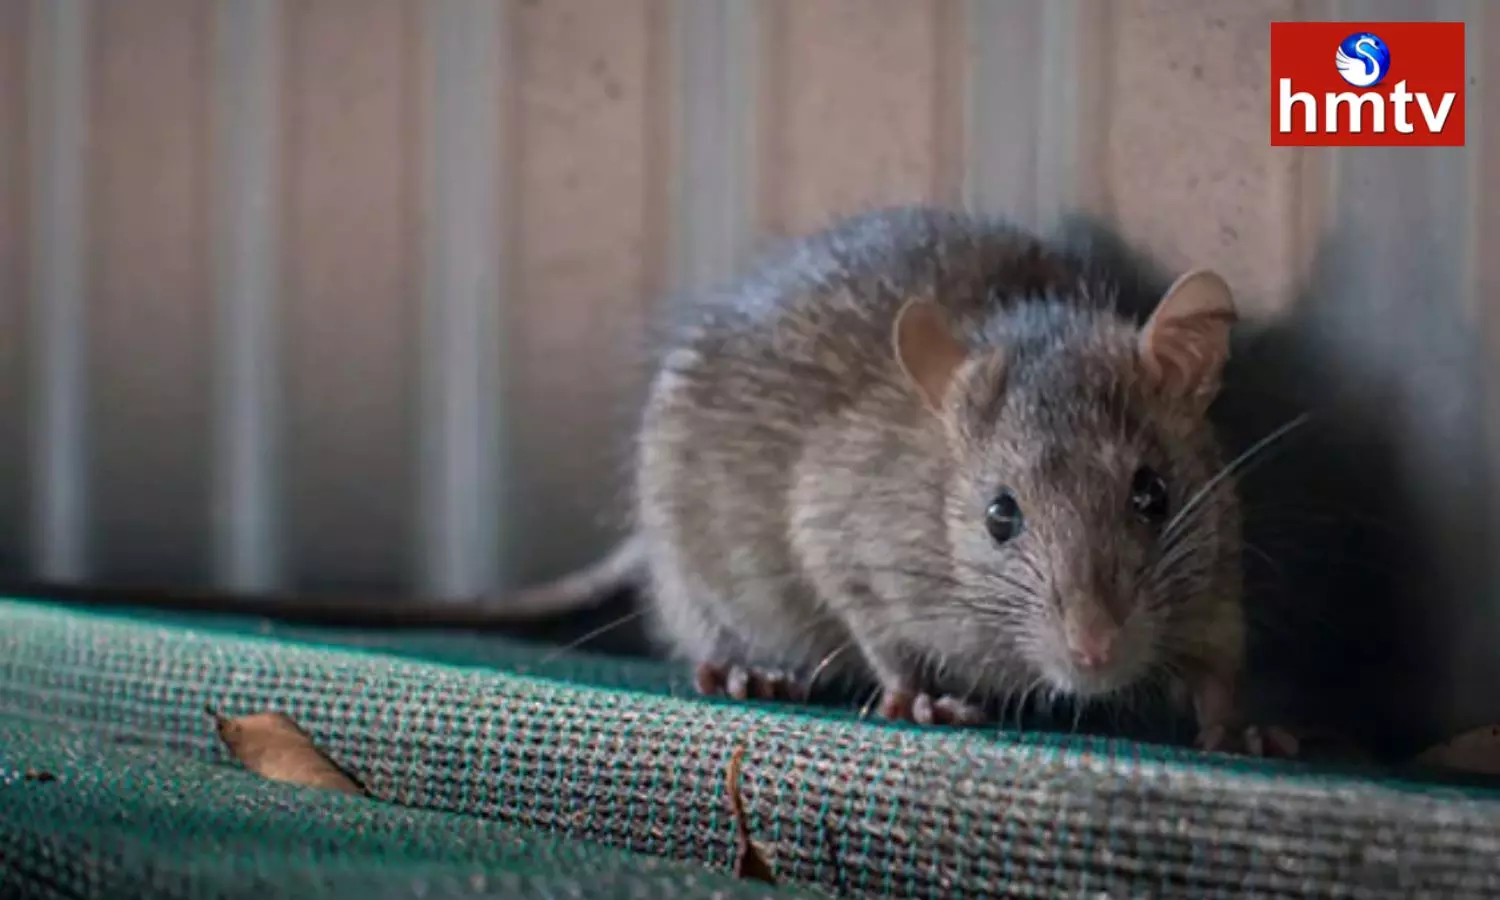 New York City Officials TO Spent Millions of Dollars to cull the Rat Population